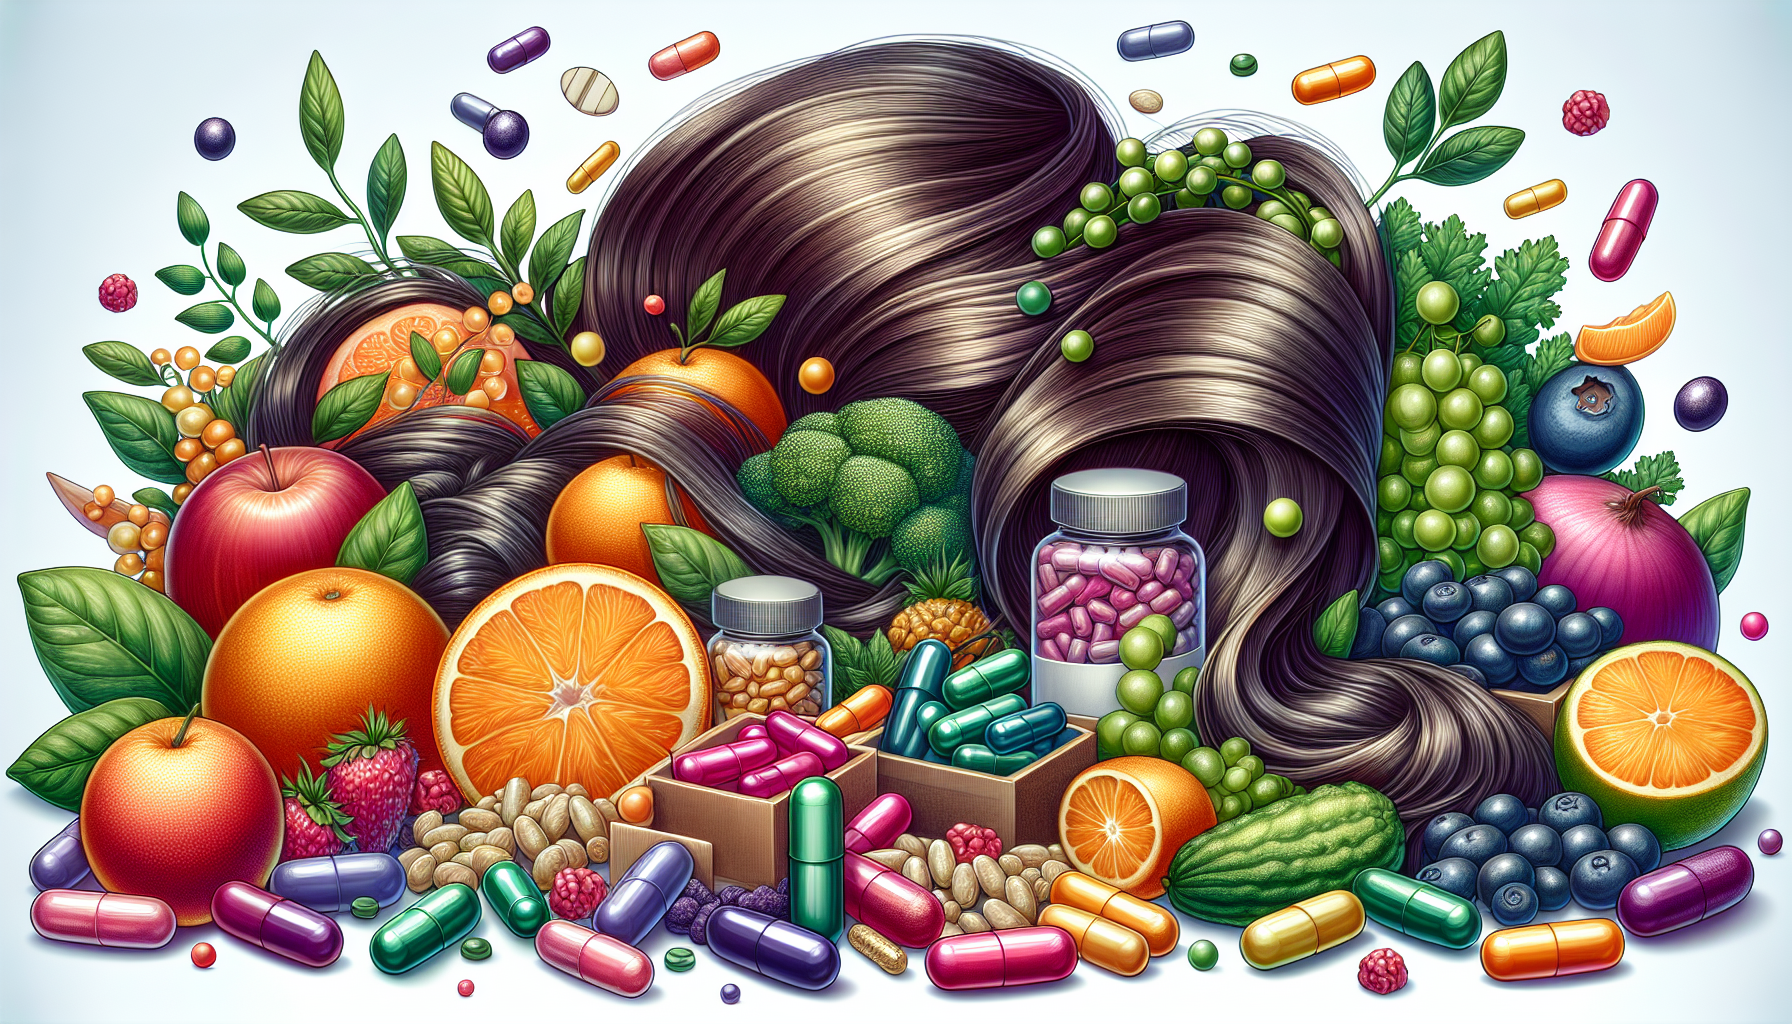 Healthy Hair Awaits: Find the Best Supplement for Hair Growth